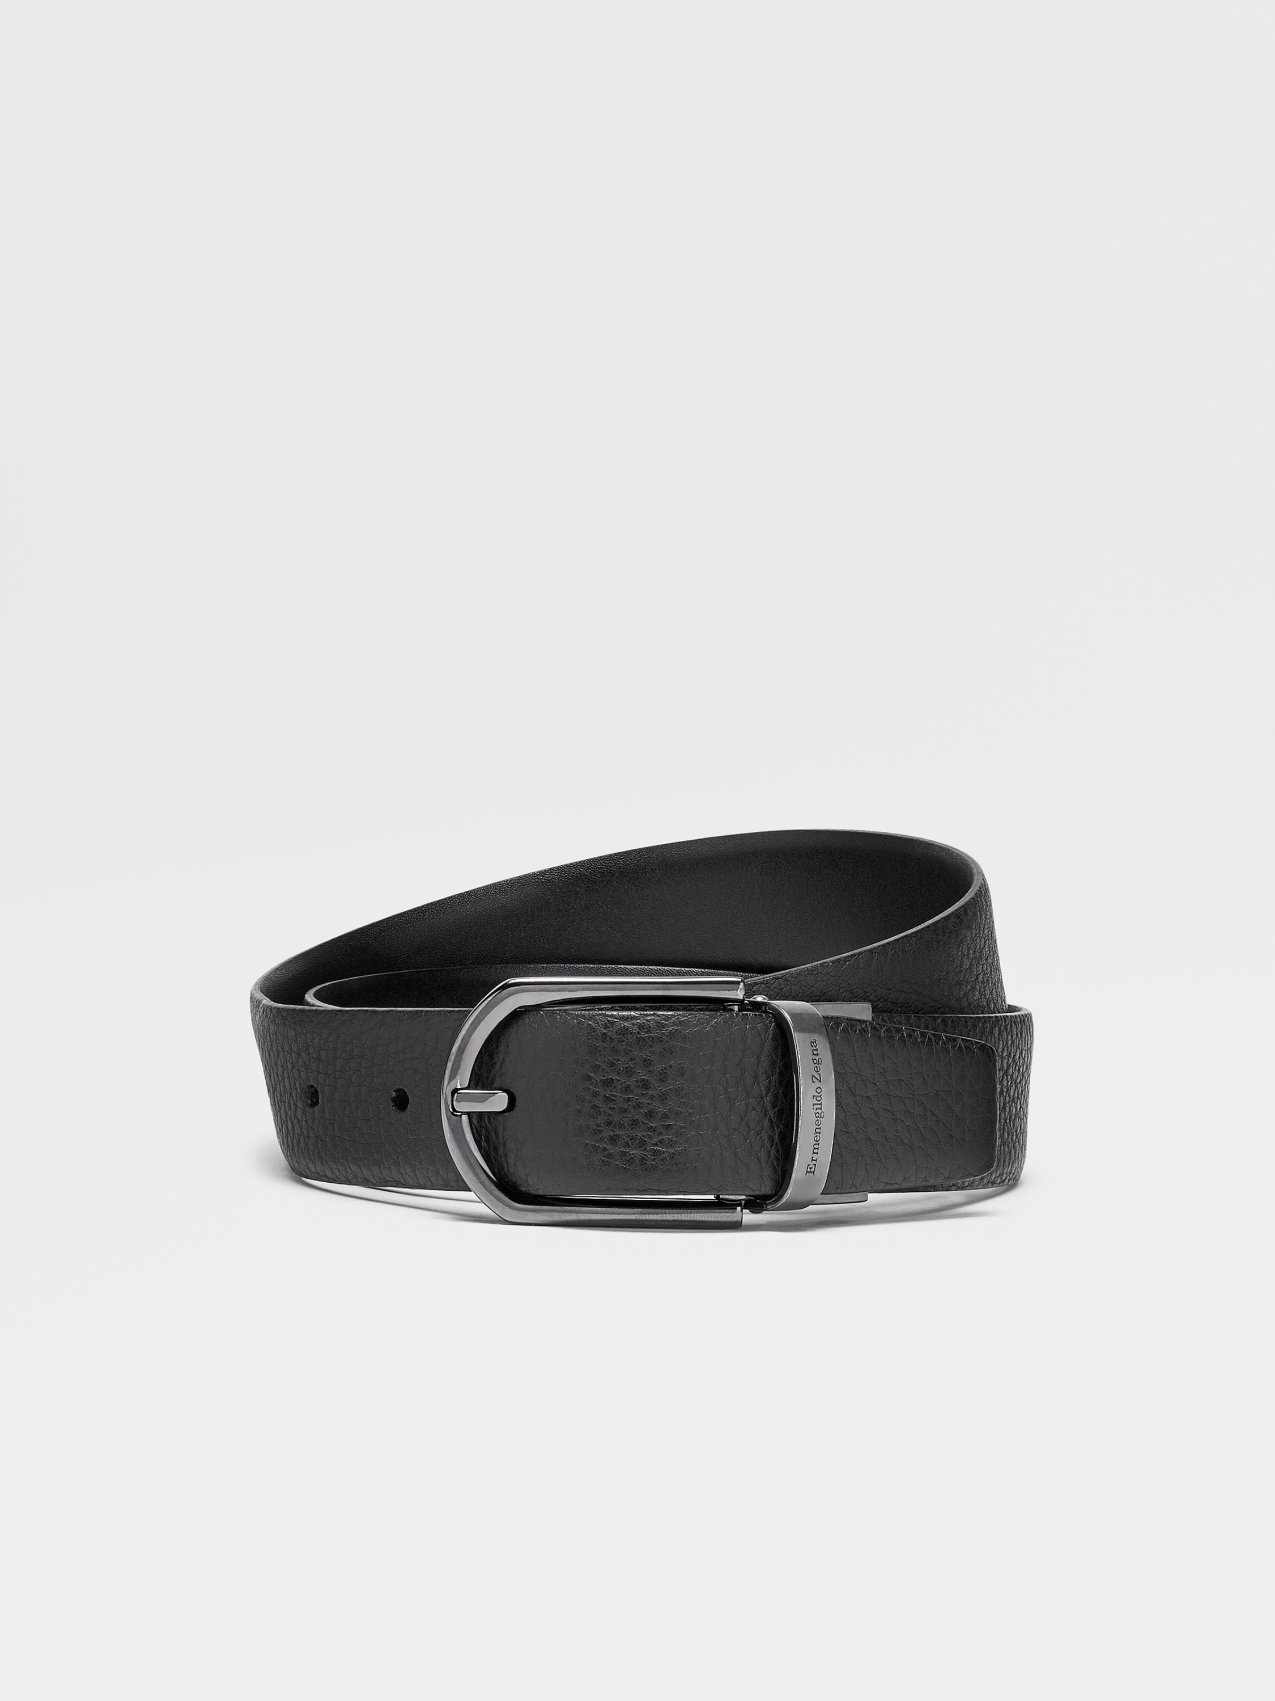 Black Grained Leather and Black Smooth Leather Reversible Belt